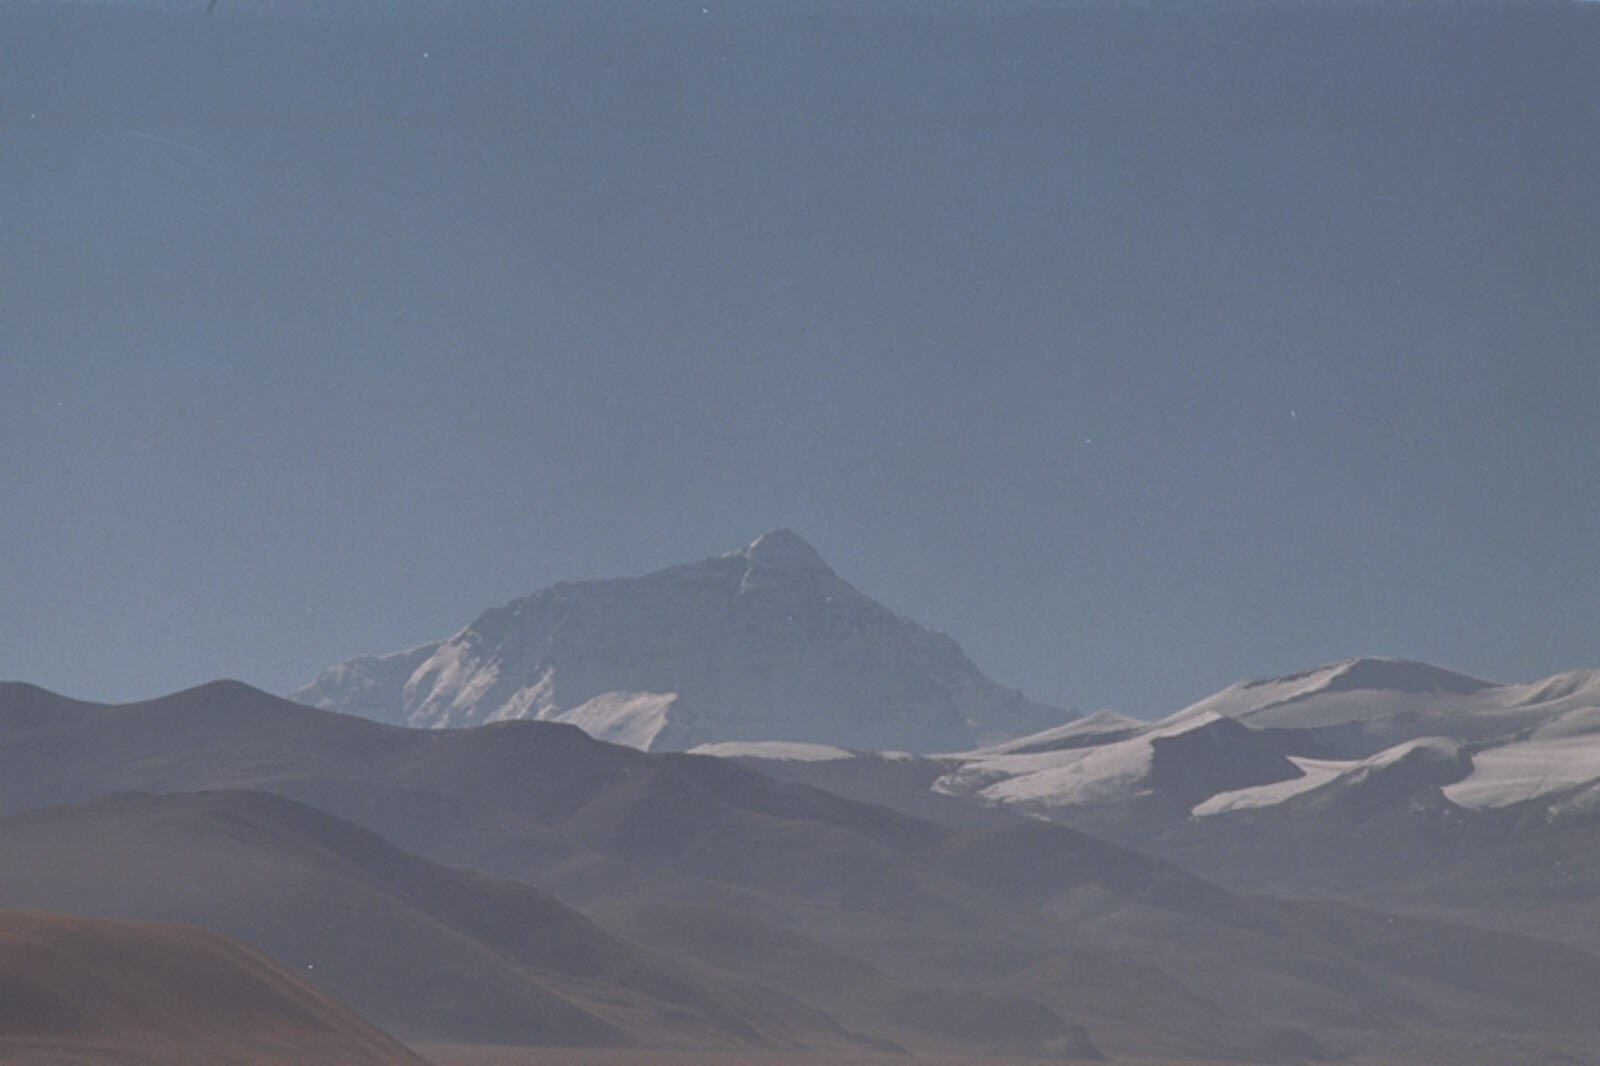 View of Mount Everest from the road near Tingri in Tibet